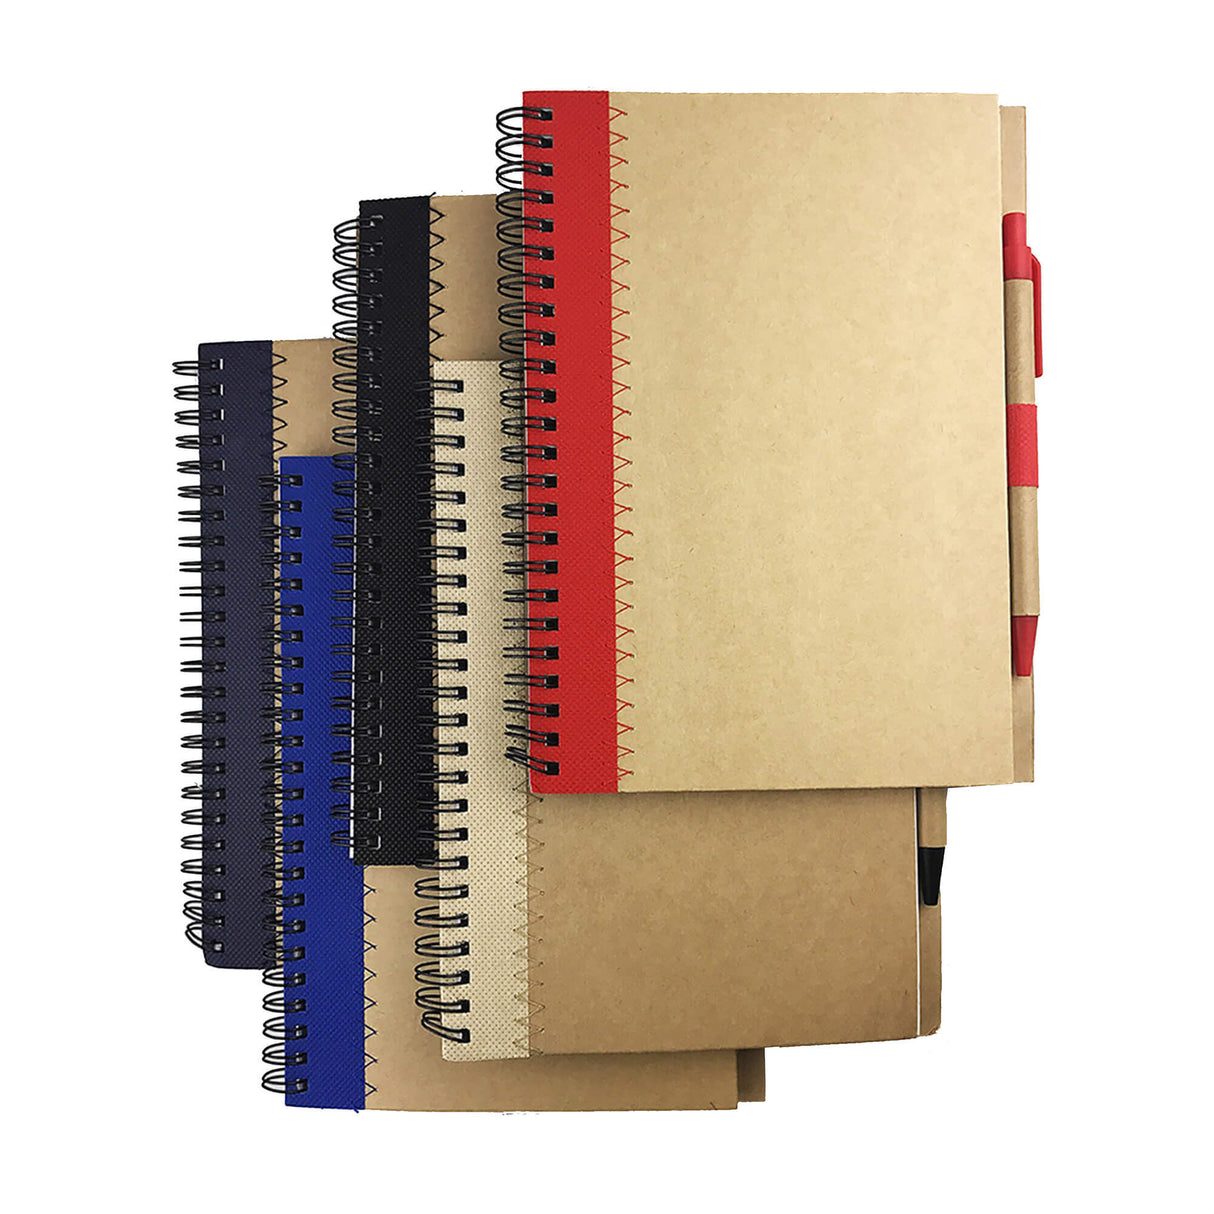 A5 Recycled Paper Notebook - Printed